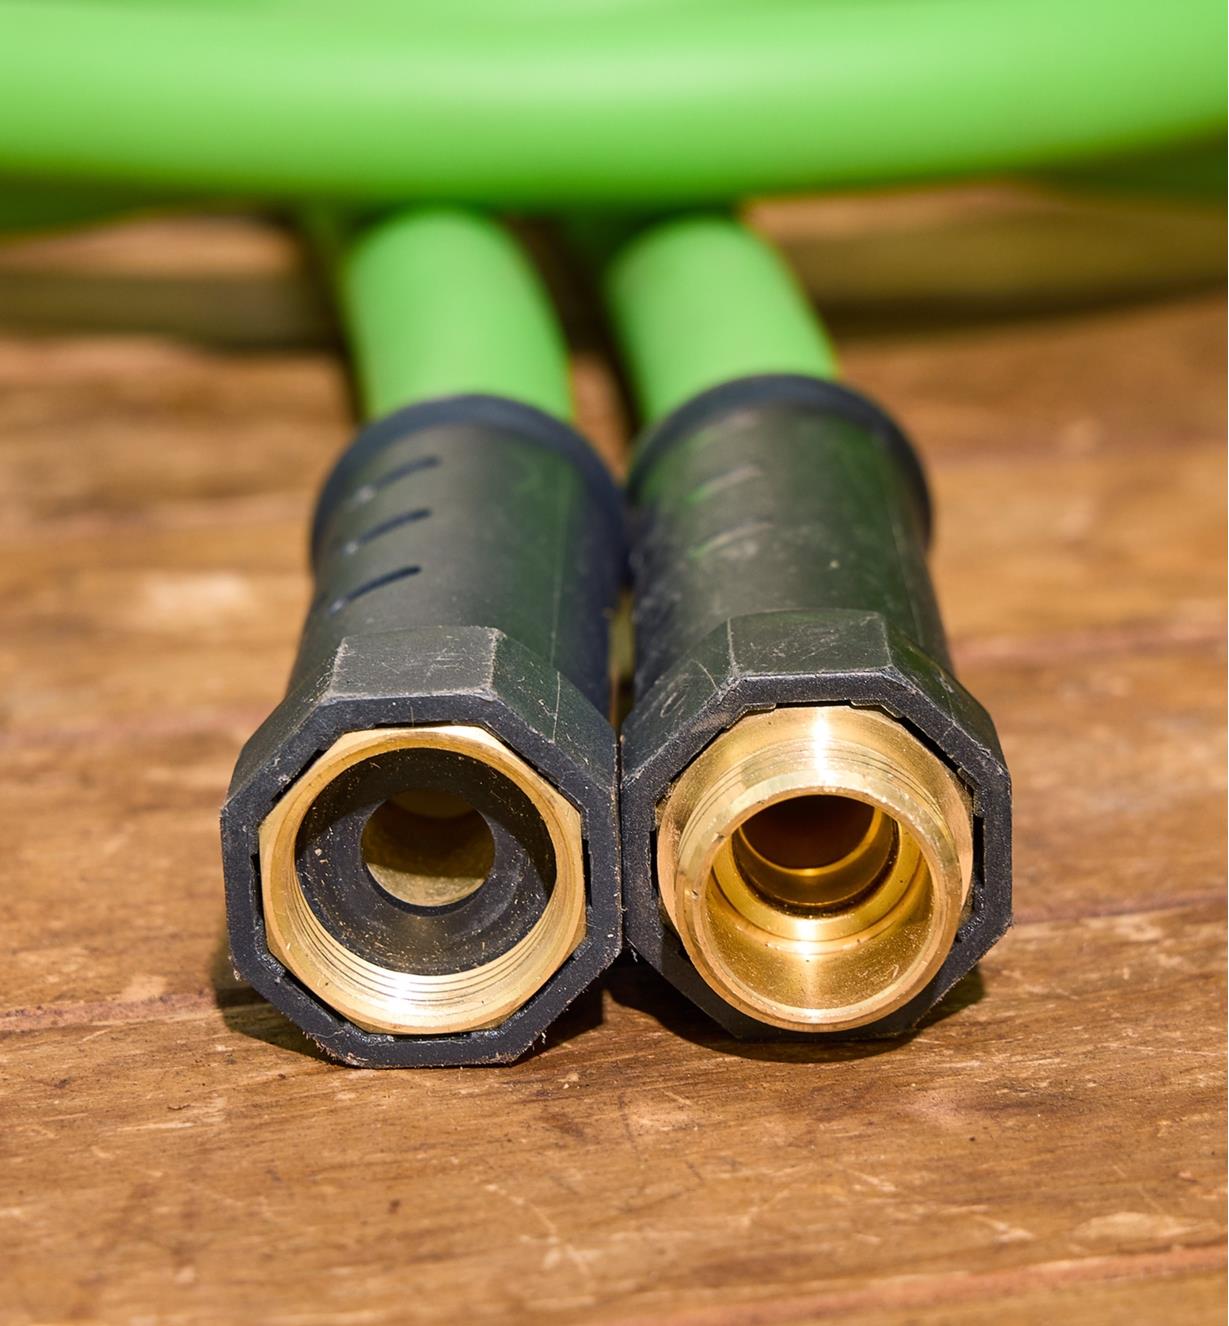 The ends of a 3/4" hose with plastic swivel collar and brass fittings